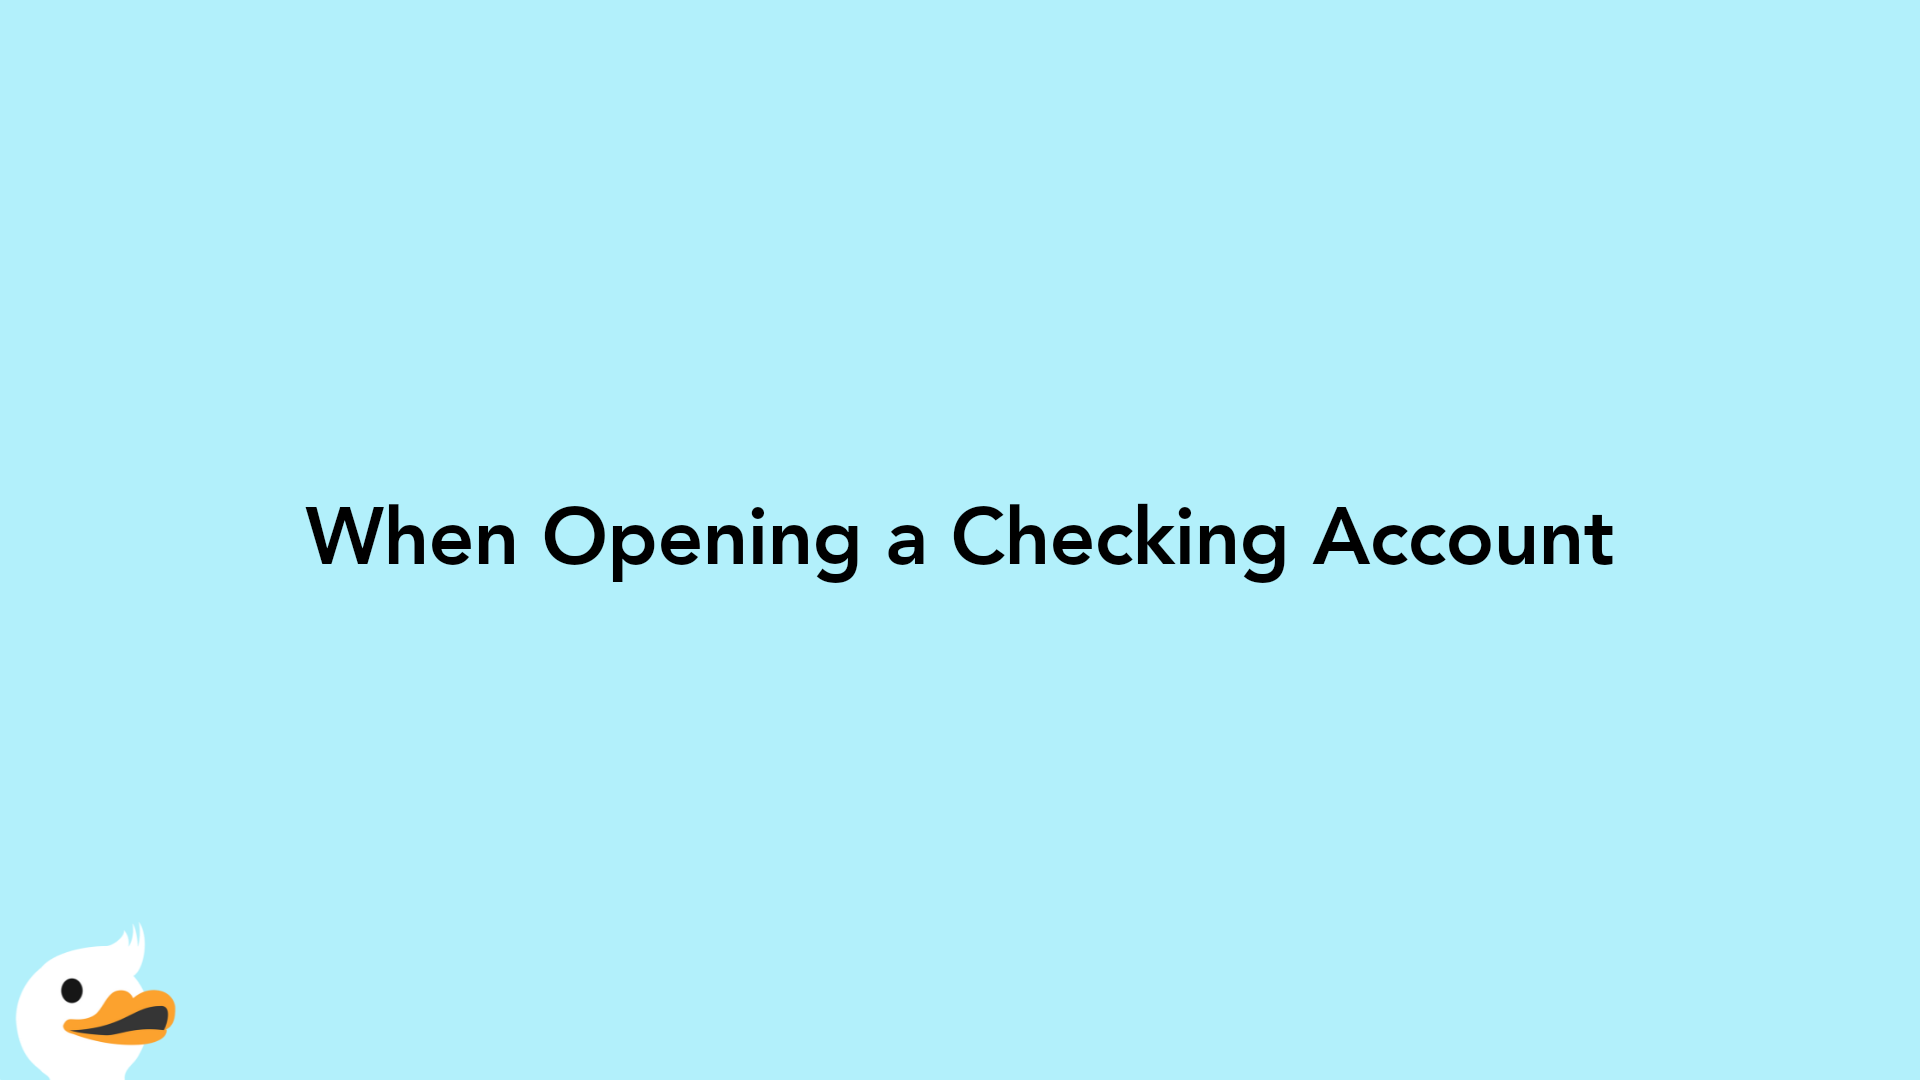 When Opening a Checking Account